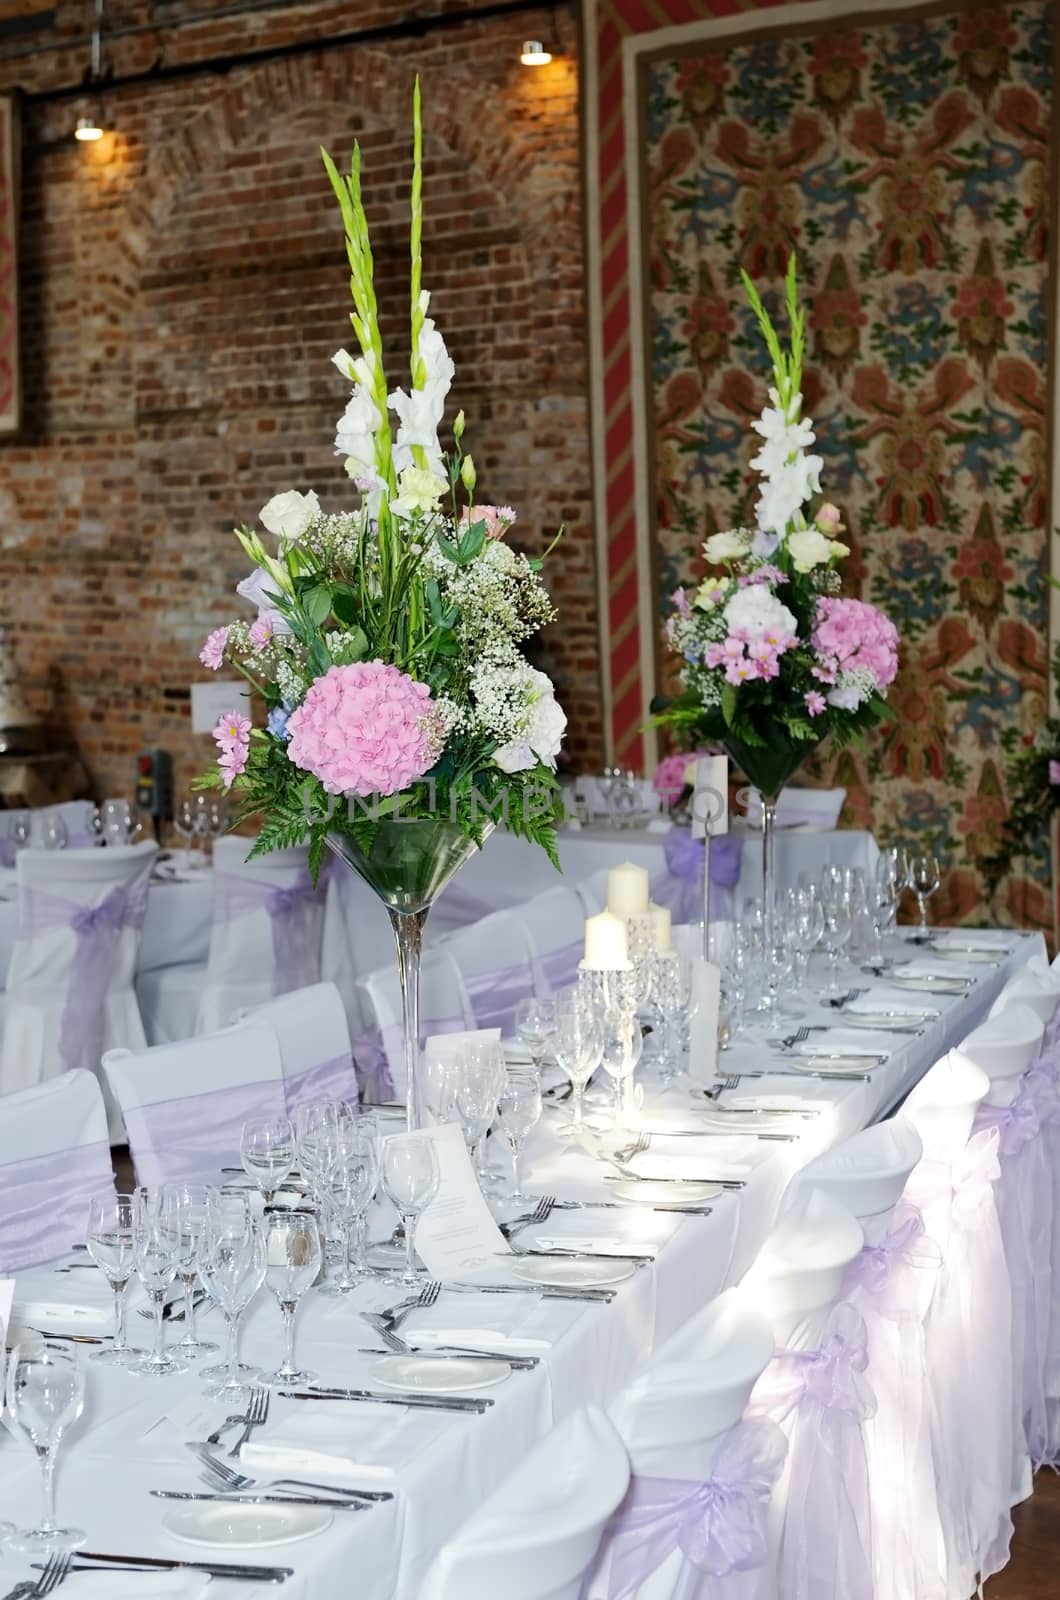 Wedding reception setting shows table with floral arrangements